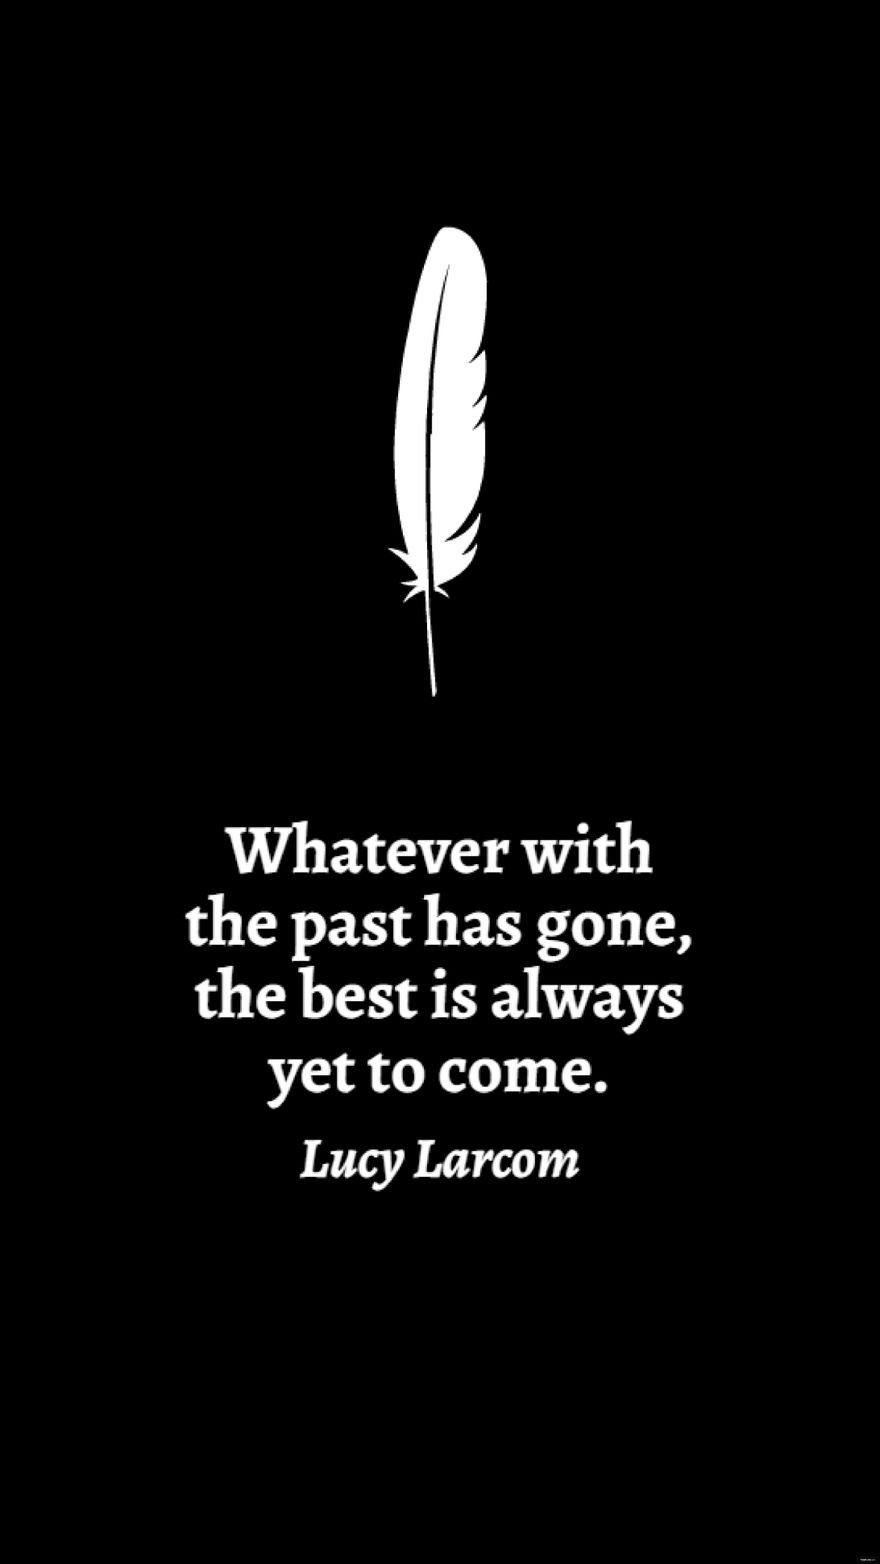 Free Lucy Larcom - Whatever with the past has gone, the best is always yet to come.